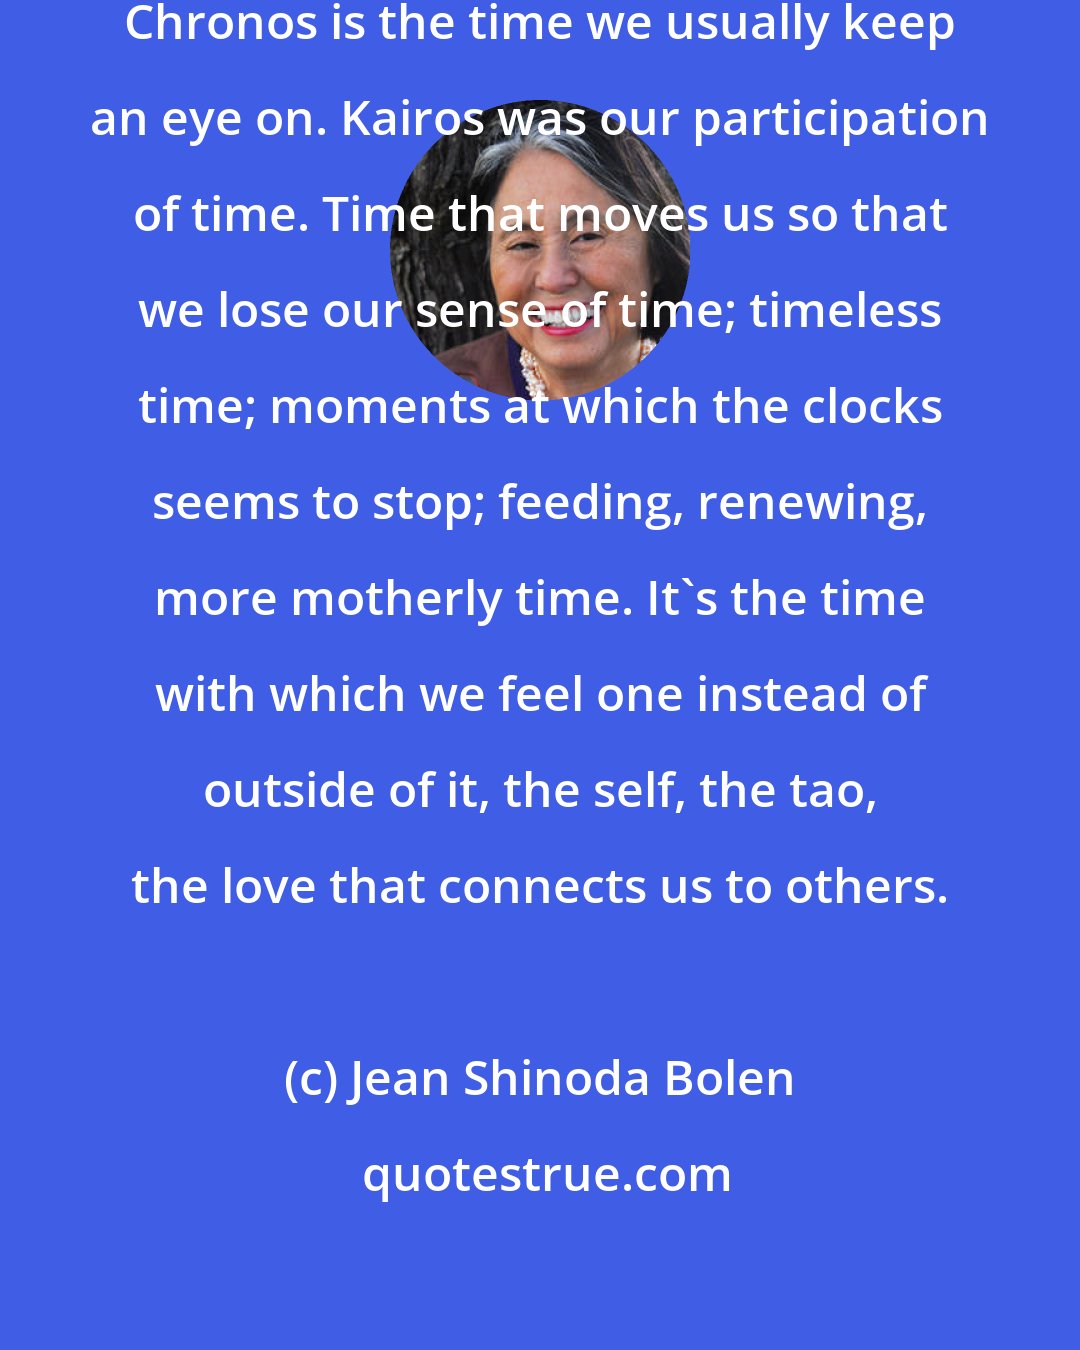 Jean Shinoda Bolen: The Greeks had two words for time. Chronos is the time we usually keep an eye on. Kairos was our participation of time. Time that moves us so that we lose our sense of time; timeless time; moments at which the clocks seems to stop; feeding, renewing, more motherly time. It's the time with which we feel one instead of outside of it, the self, the tao, the love that connects us to others.